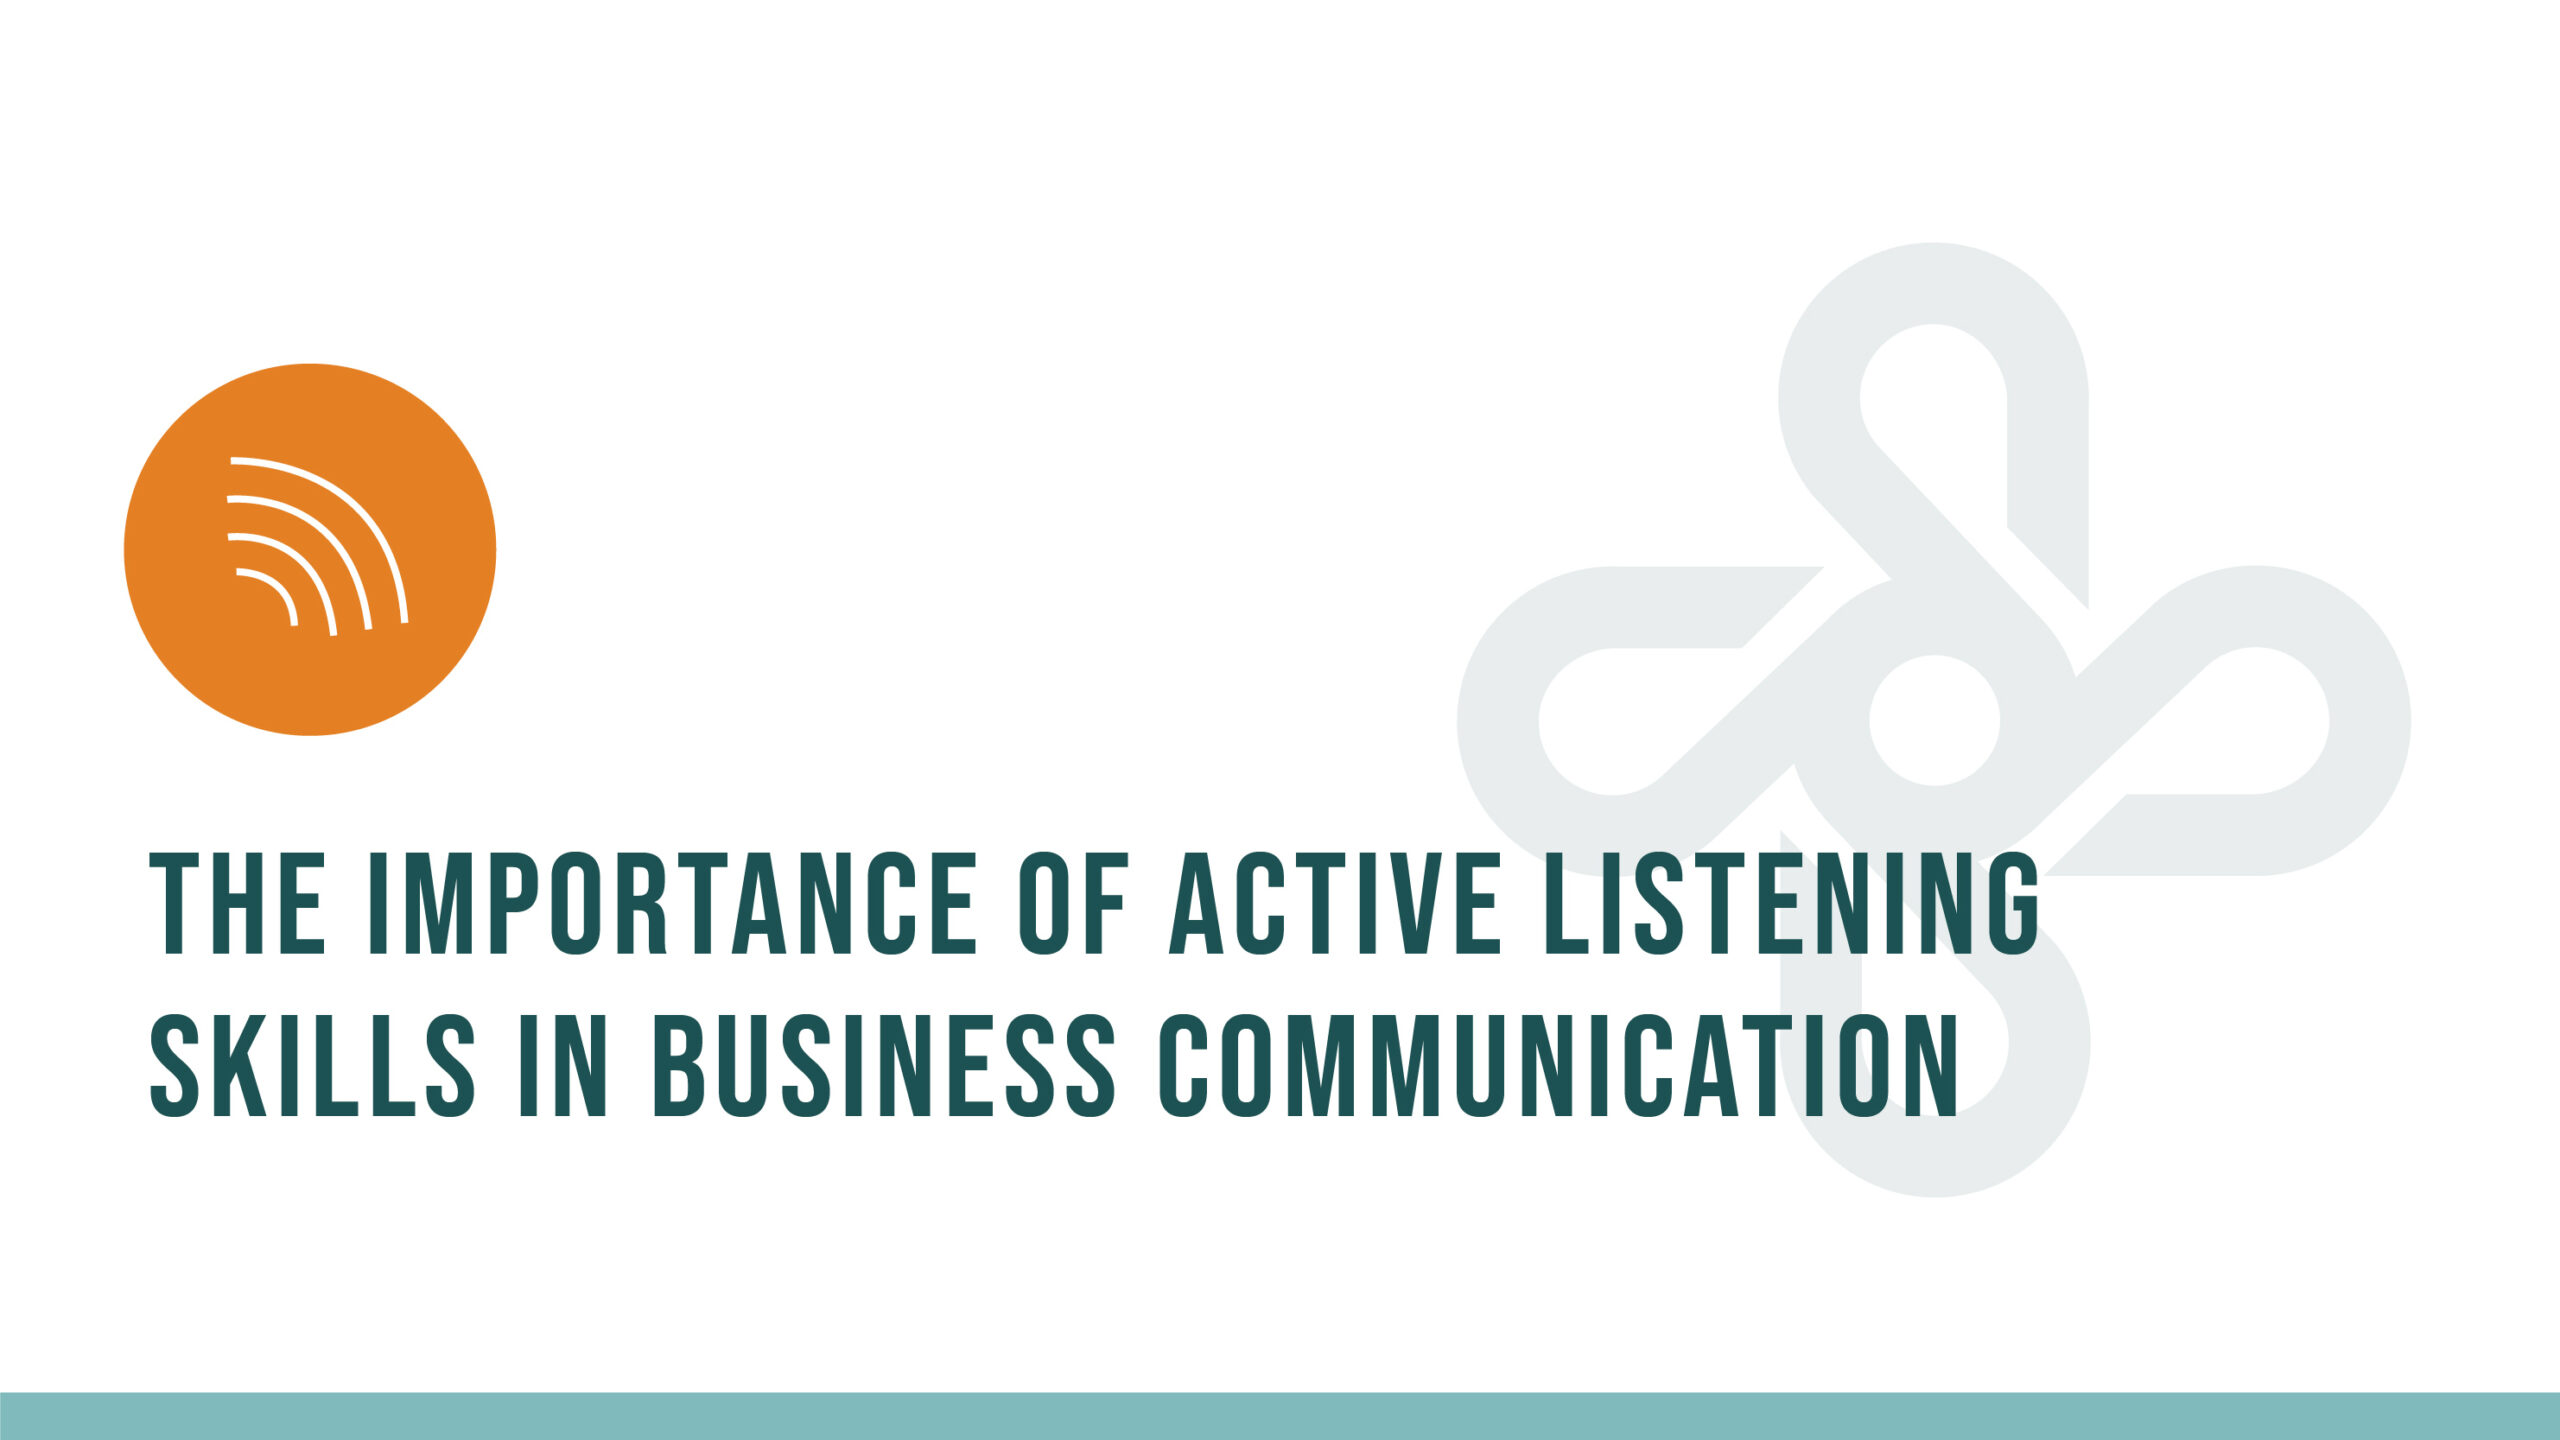 Importance of active listening